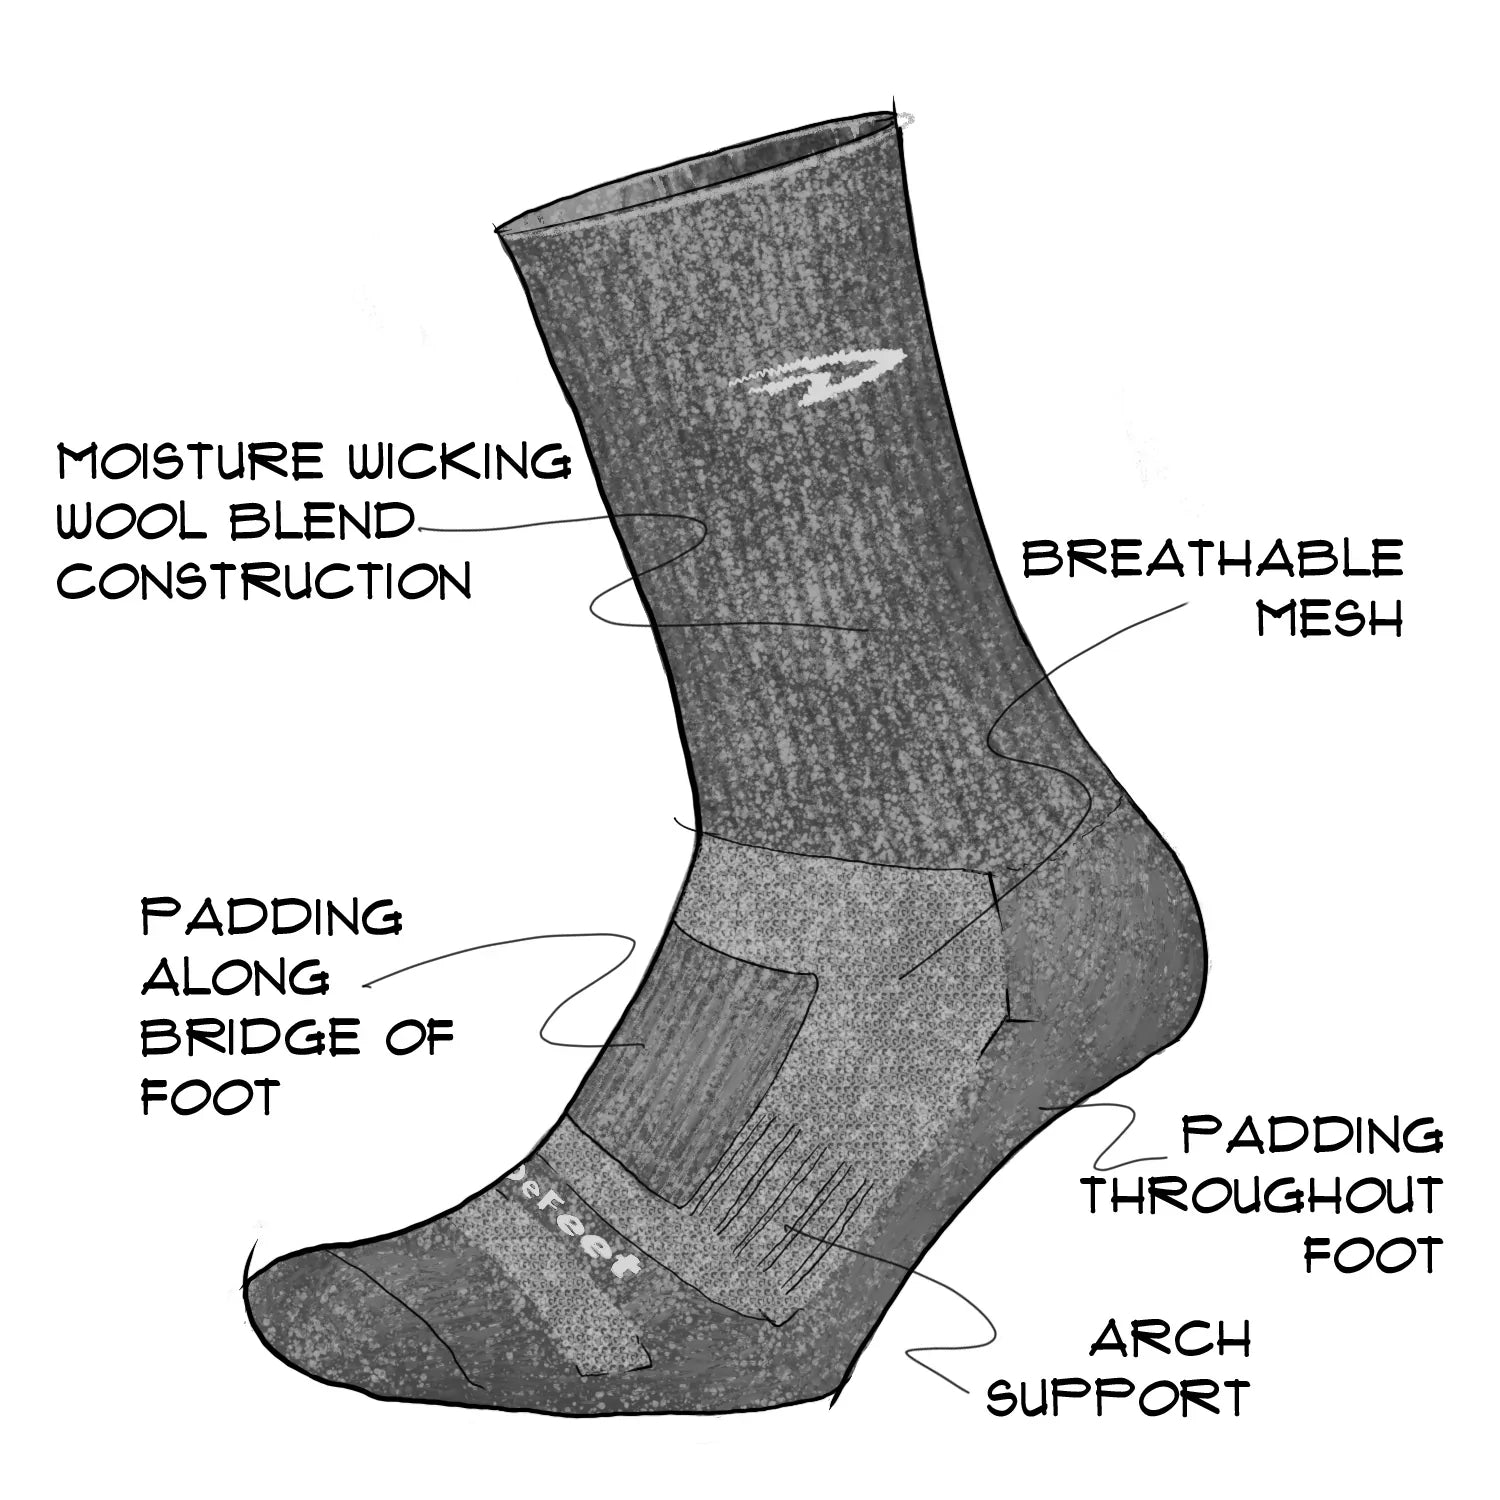 technical drawing of DeFeet Woolie Boolie noting features such as padding, arch support, and moisture-wicking wool